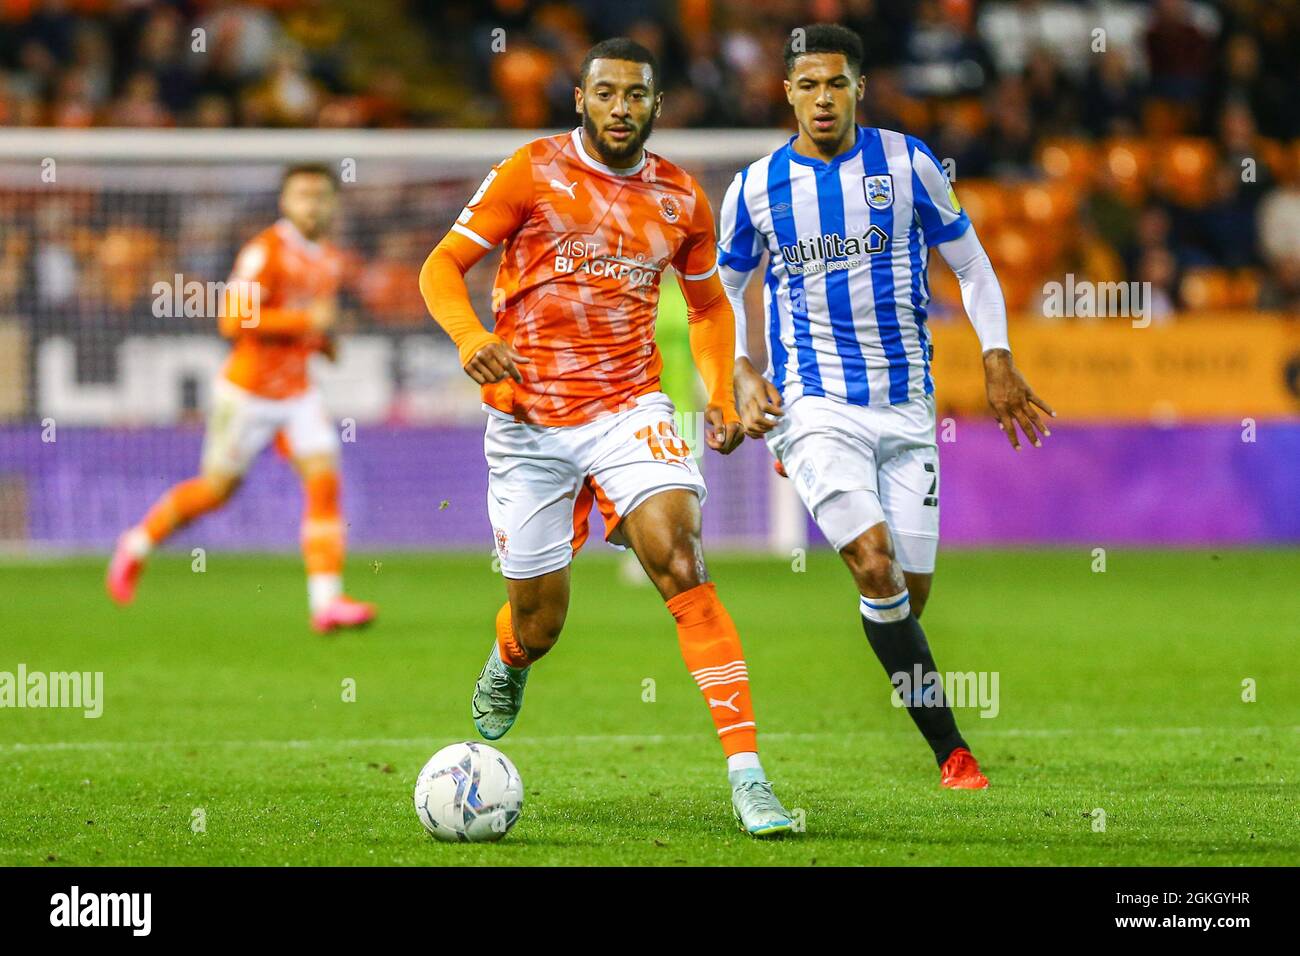 Blackpool, UK. 14th Sep, 2021. Blackpool midfielder Keshi Anderson during the Sky Bet Championship match between Blackpool and Huddersfield Town at Bloomfield Road, Blackpool, England on 14 September 2021. Photo by Sam Fielding. Credit: PRiME Media Images/Alamy Live News Stock Photo